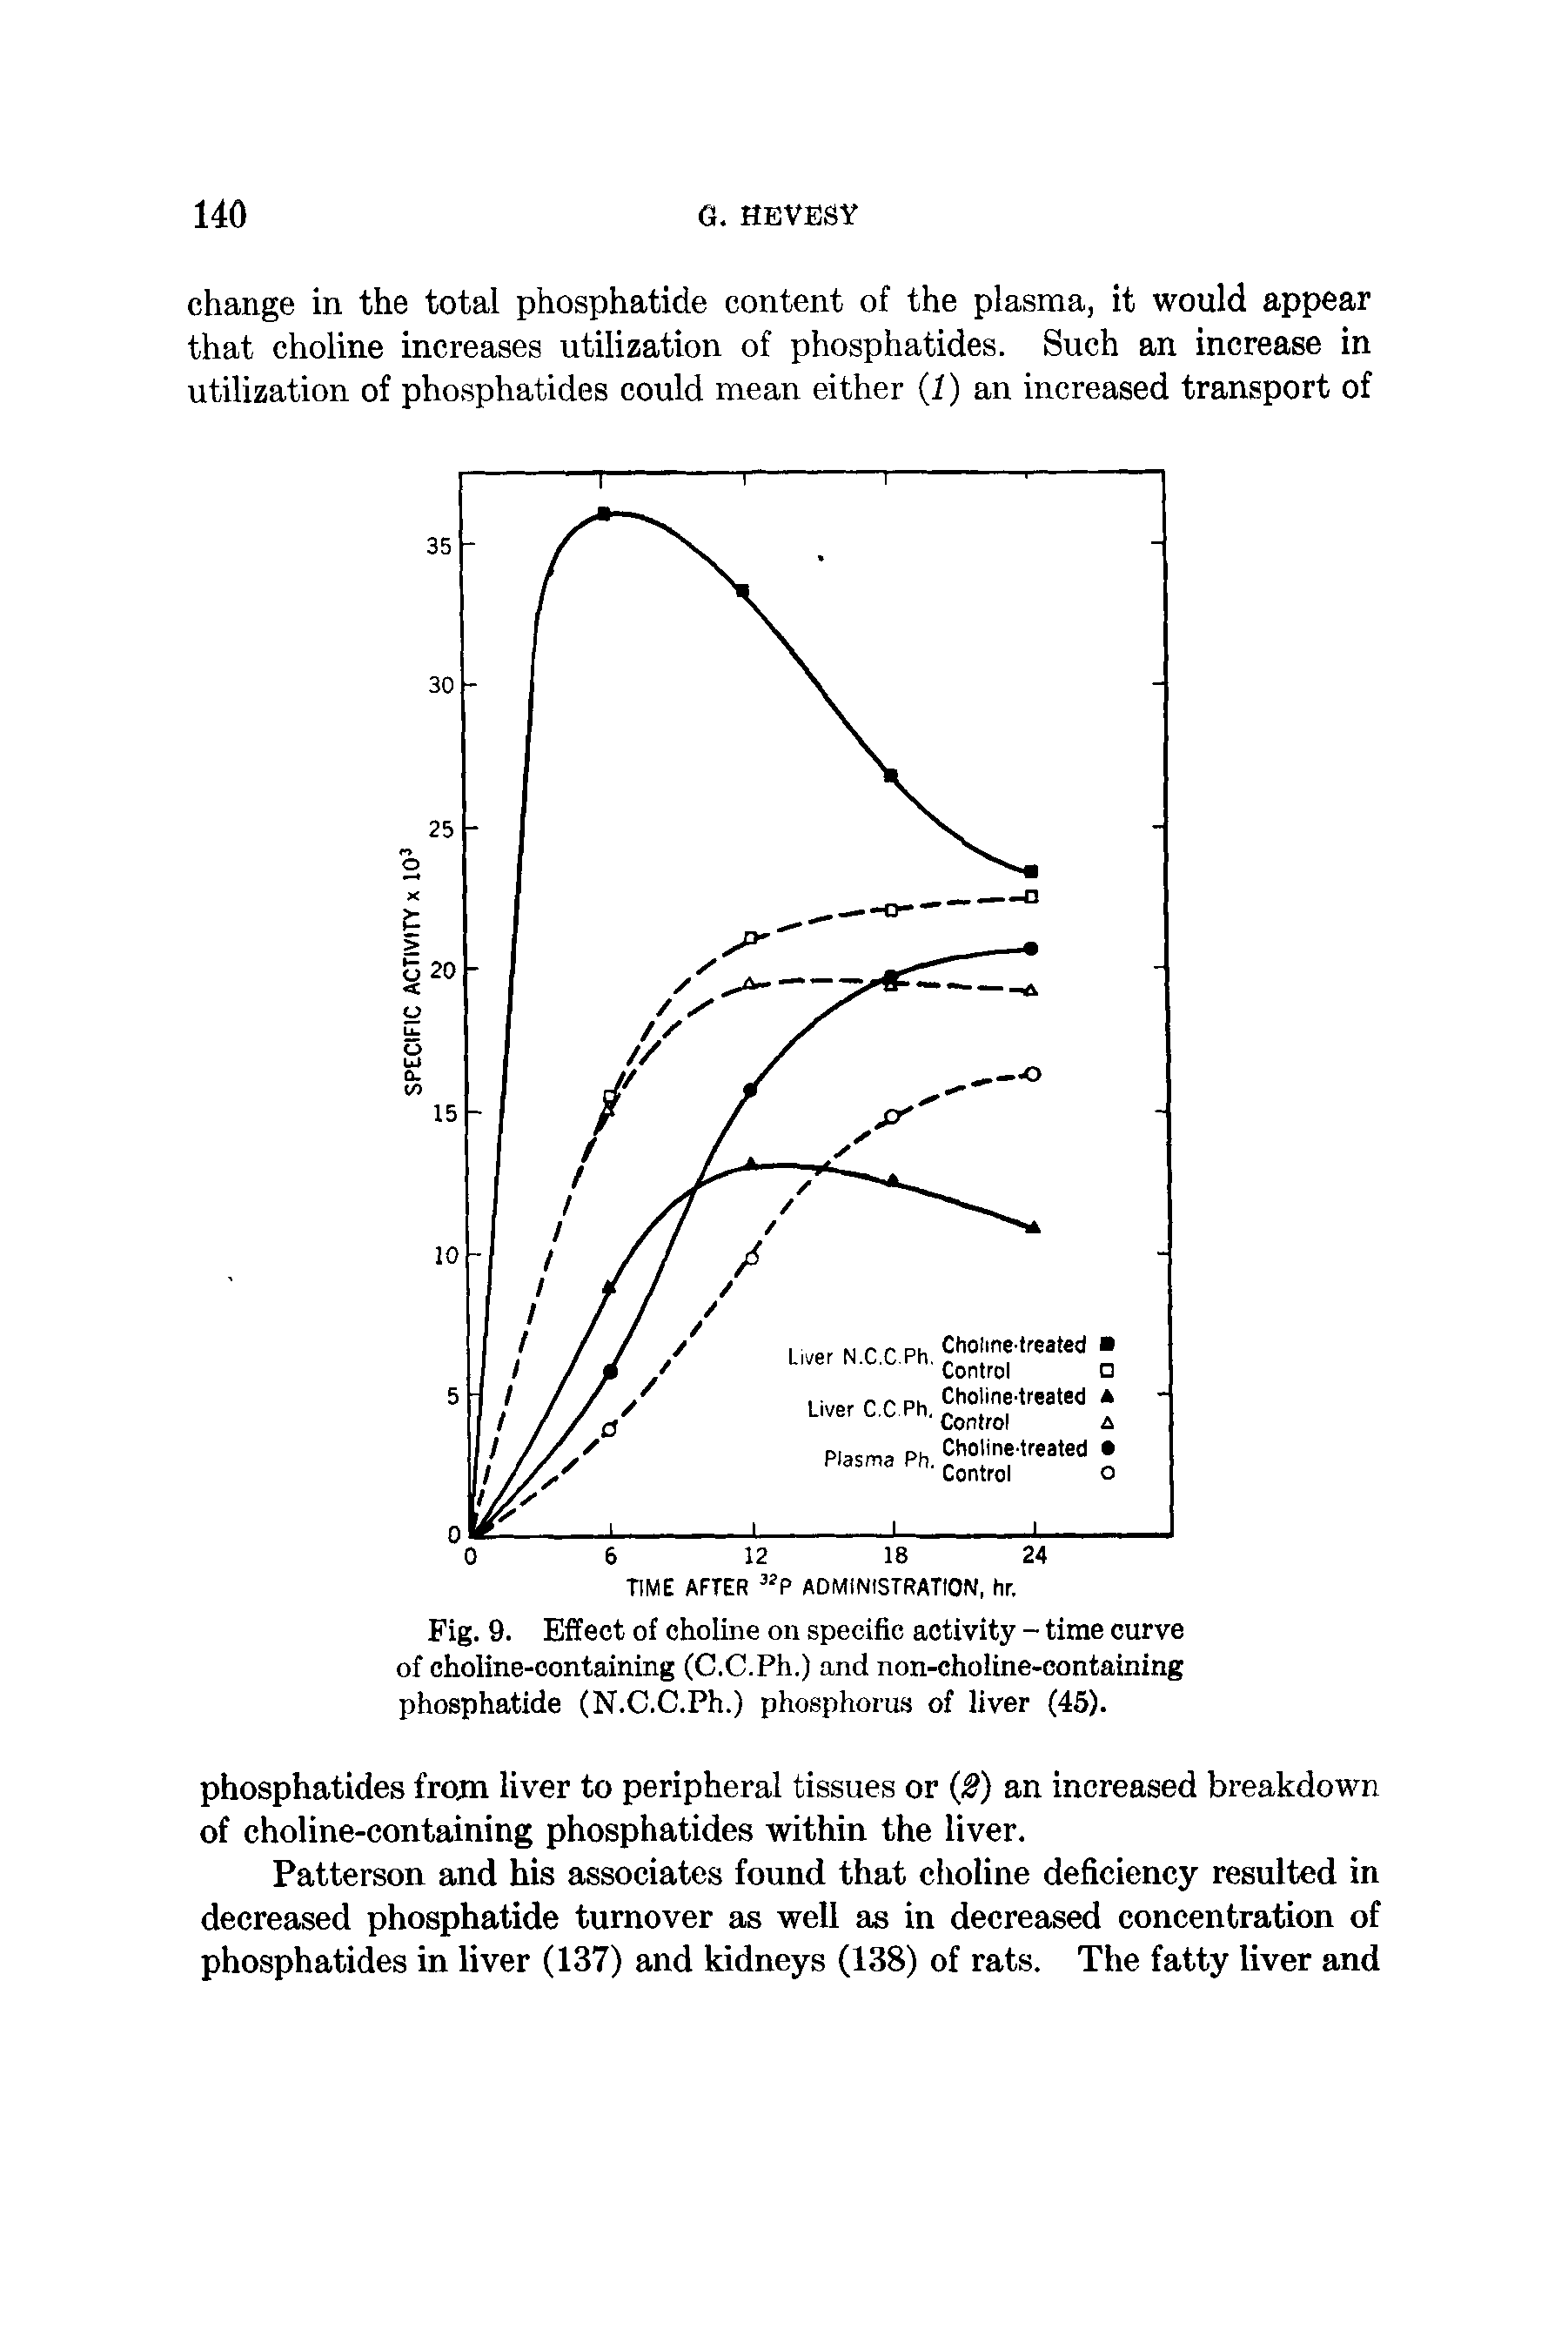 Fig. 9. Effect of choline on specific activity - time curve of choline-containing (C.C.Ph.) and non-choline-containing phosphatide (N.C.C.Ph.) phosphorus of liver (45).